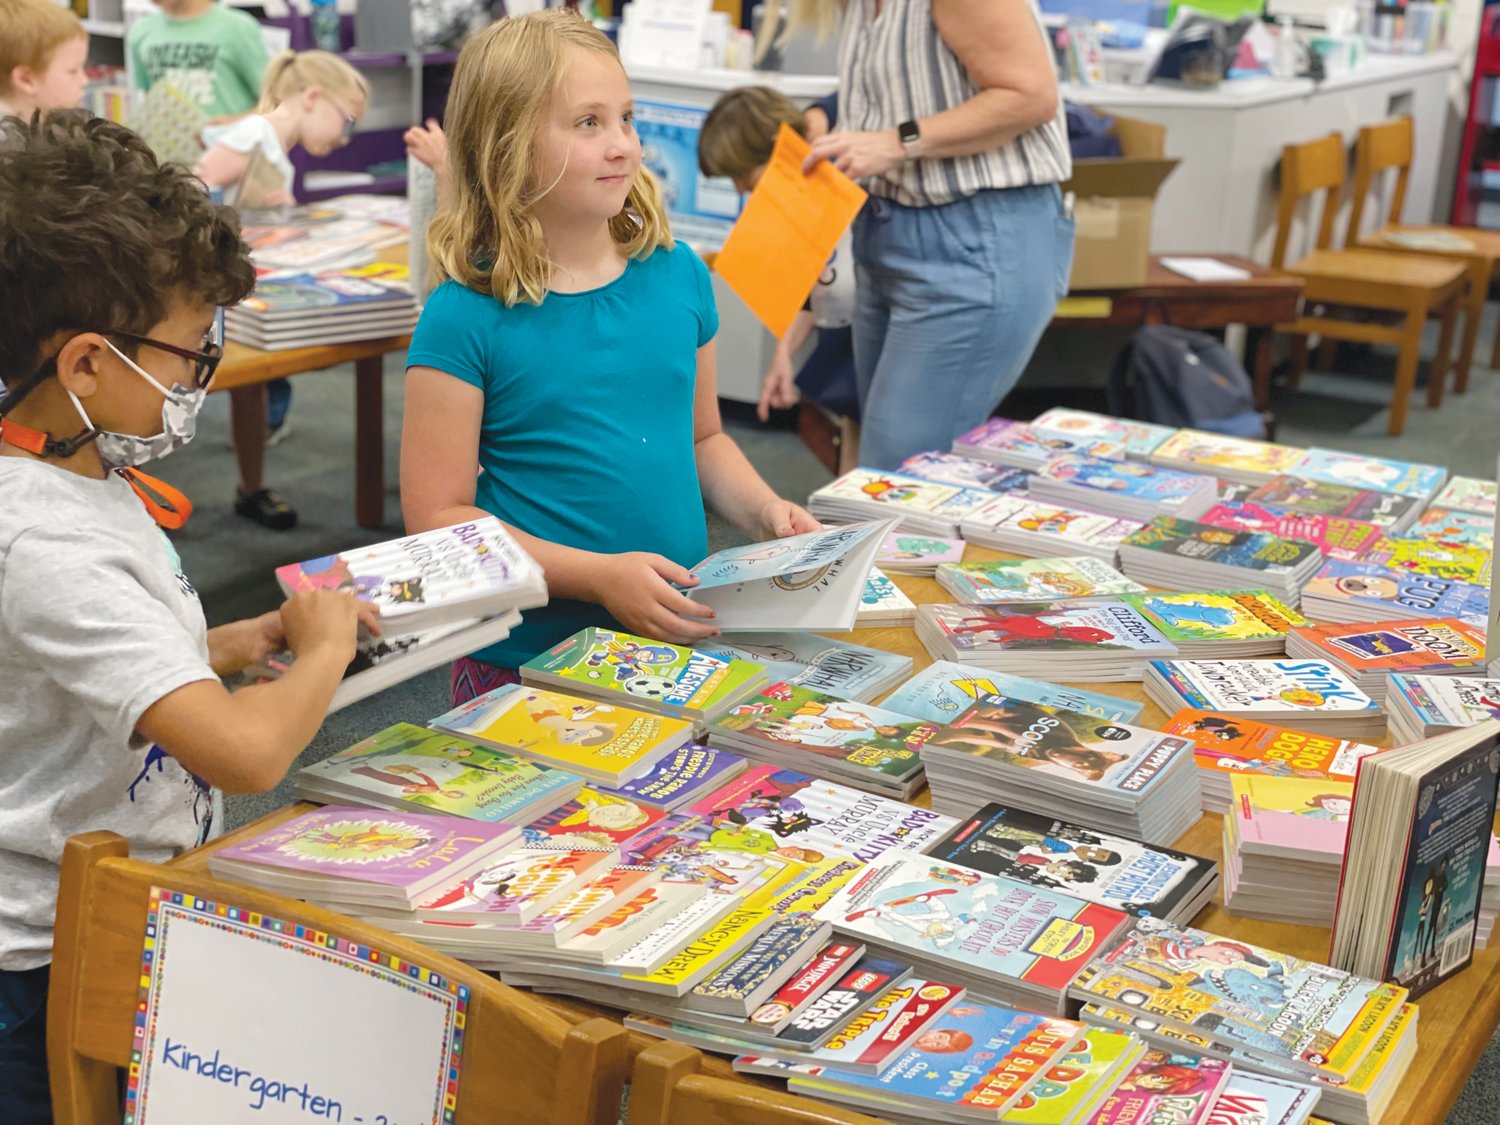 Kingergarten students at Silk Hope School in Siler City pick out new books as part of Chatham Education Foundation's Books on Break program. The event reaches more than 2,000 students at five schools across the county.